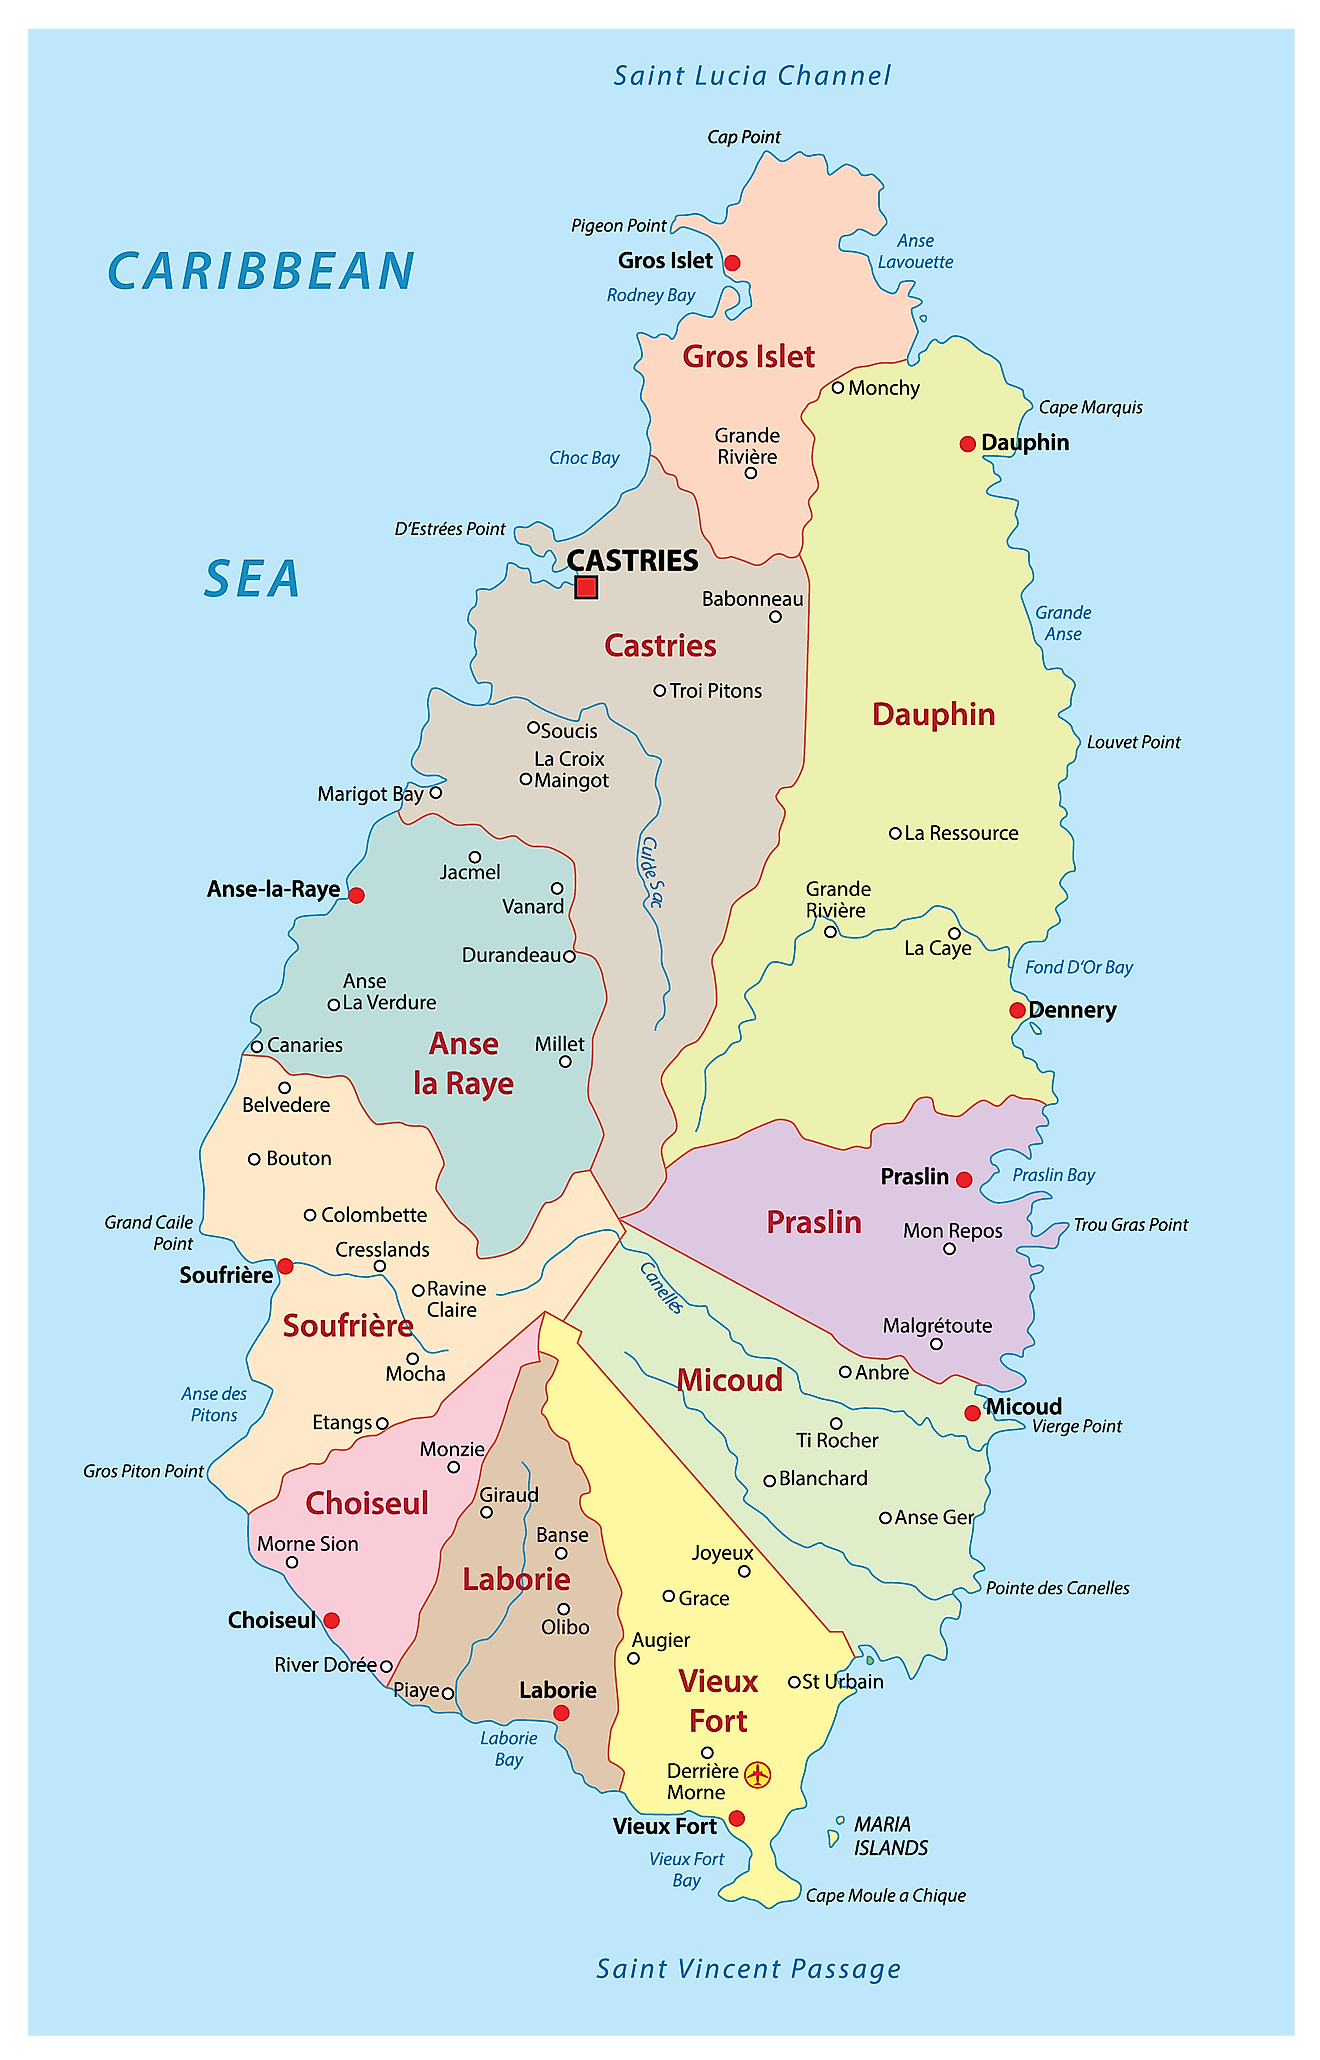 Political Map of Saint Lucia showing its 11 districts and the capital city of Castries.  